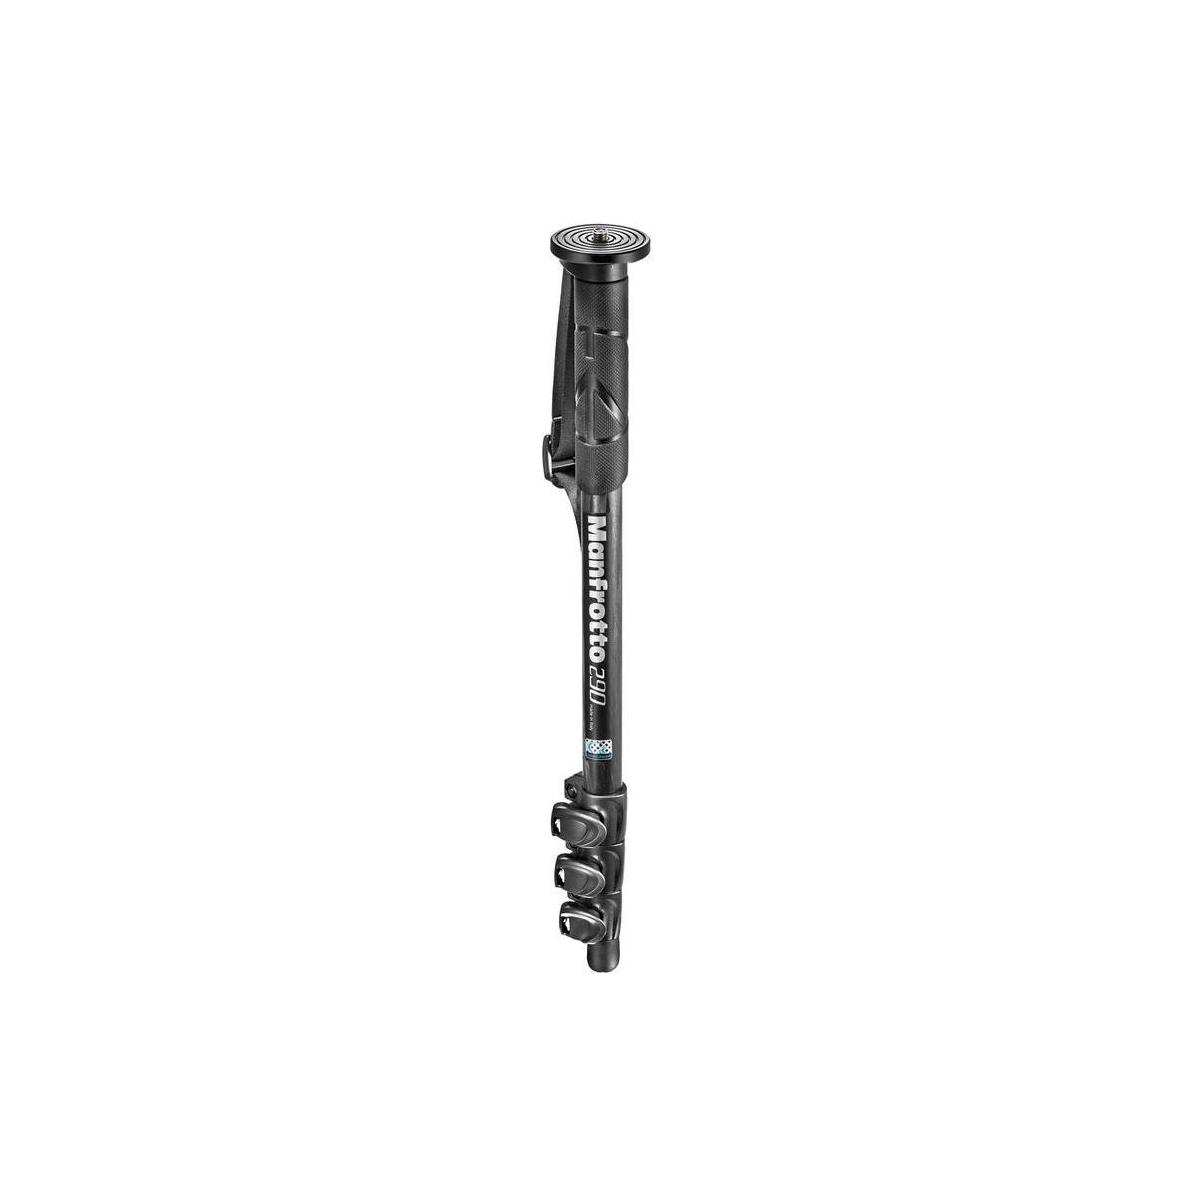 Image of Manfrotto 290 4-Section Carbon Fiber Monopod